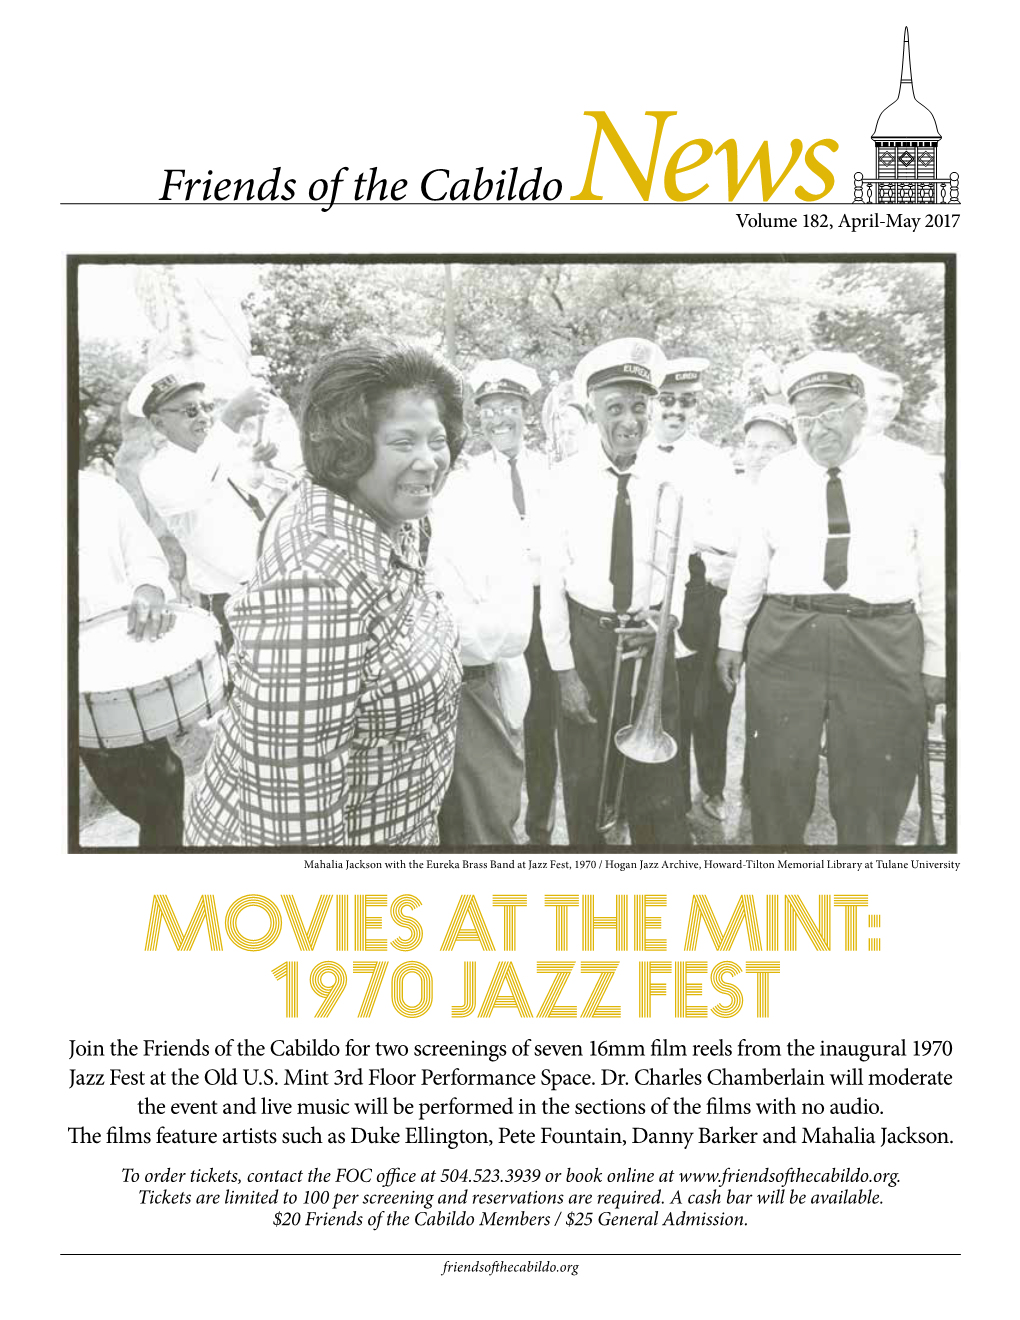 1970 Jazz Fest Join the Friends of the Cabildo for Two Screenings of Seven 16Mm Film Reels from the Inaugural 1970 Jazz Fest at the Old U.S